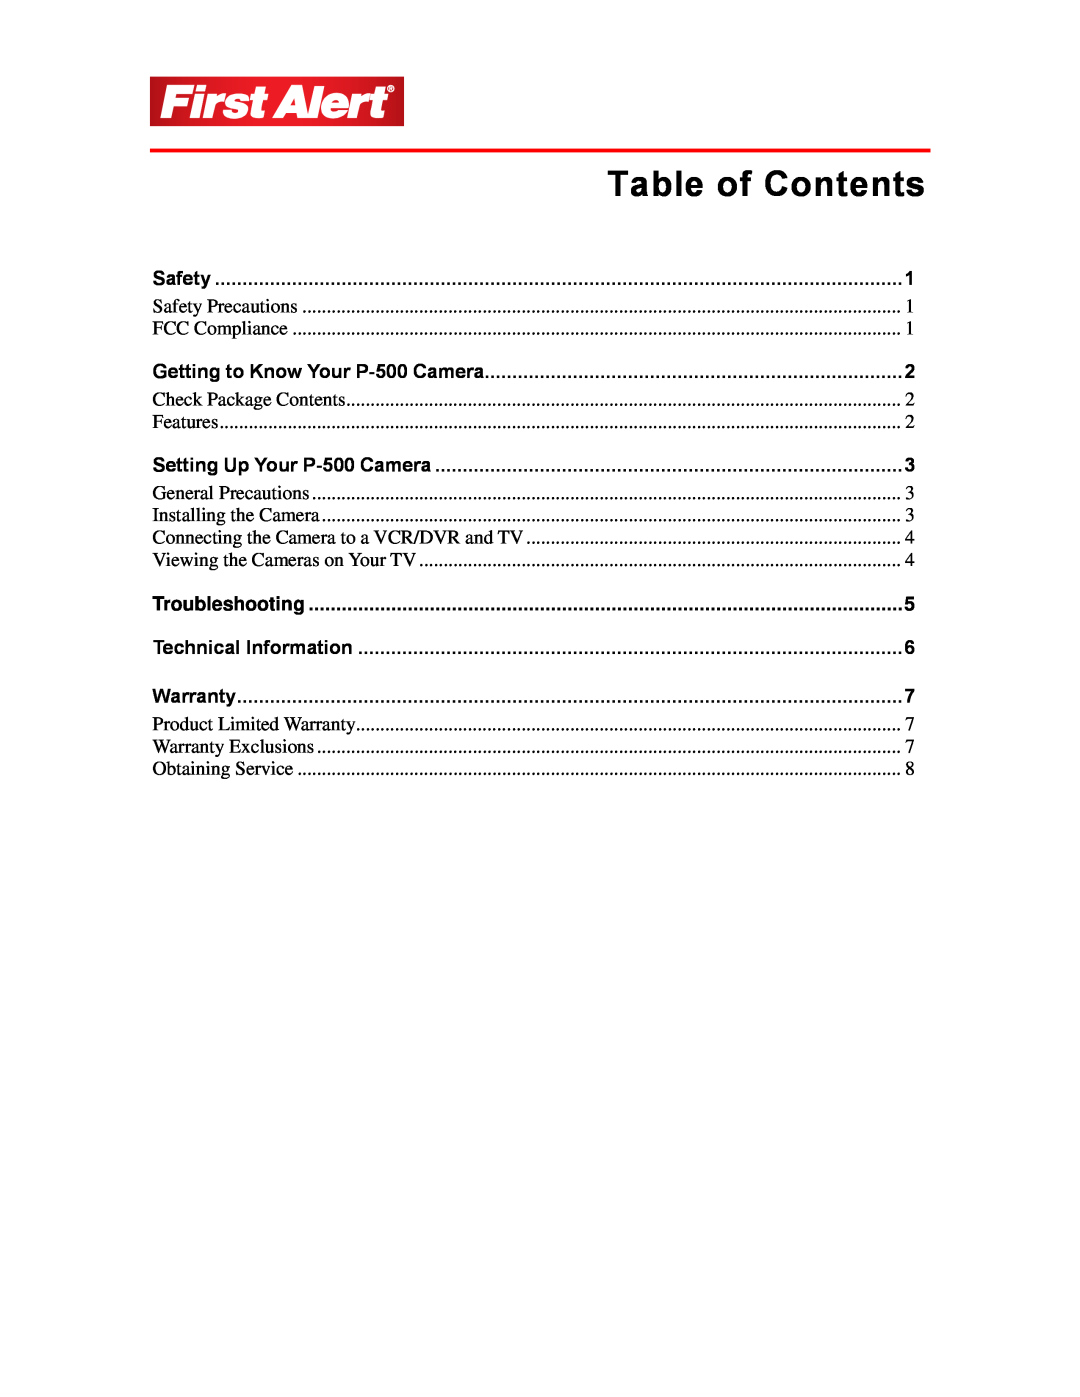 First Alert P-500 user manual Table of Contents 